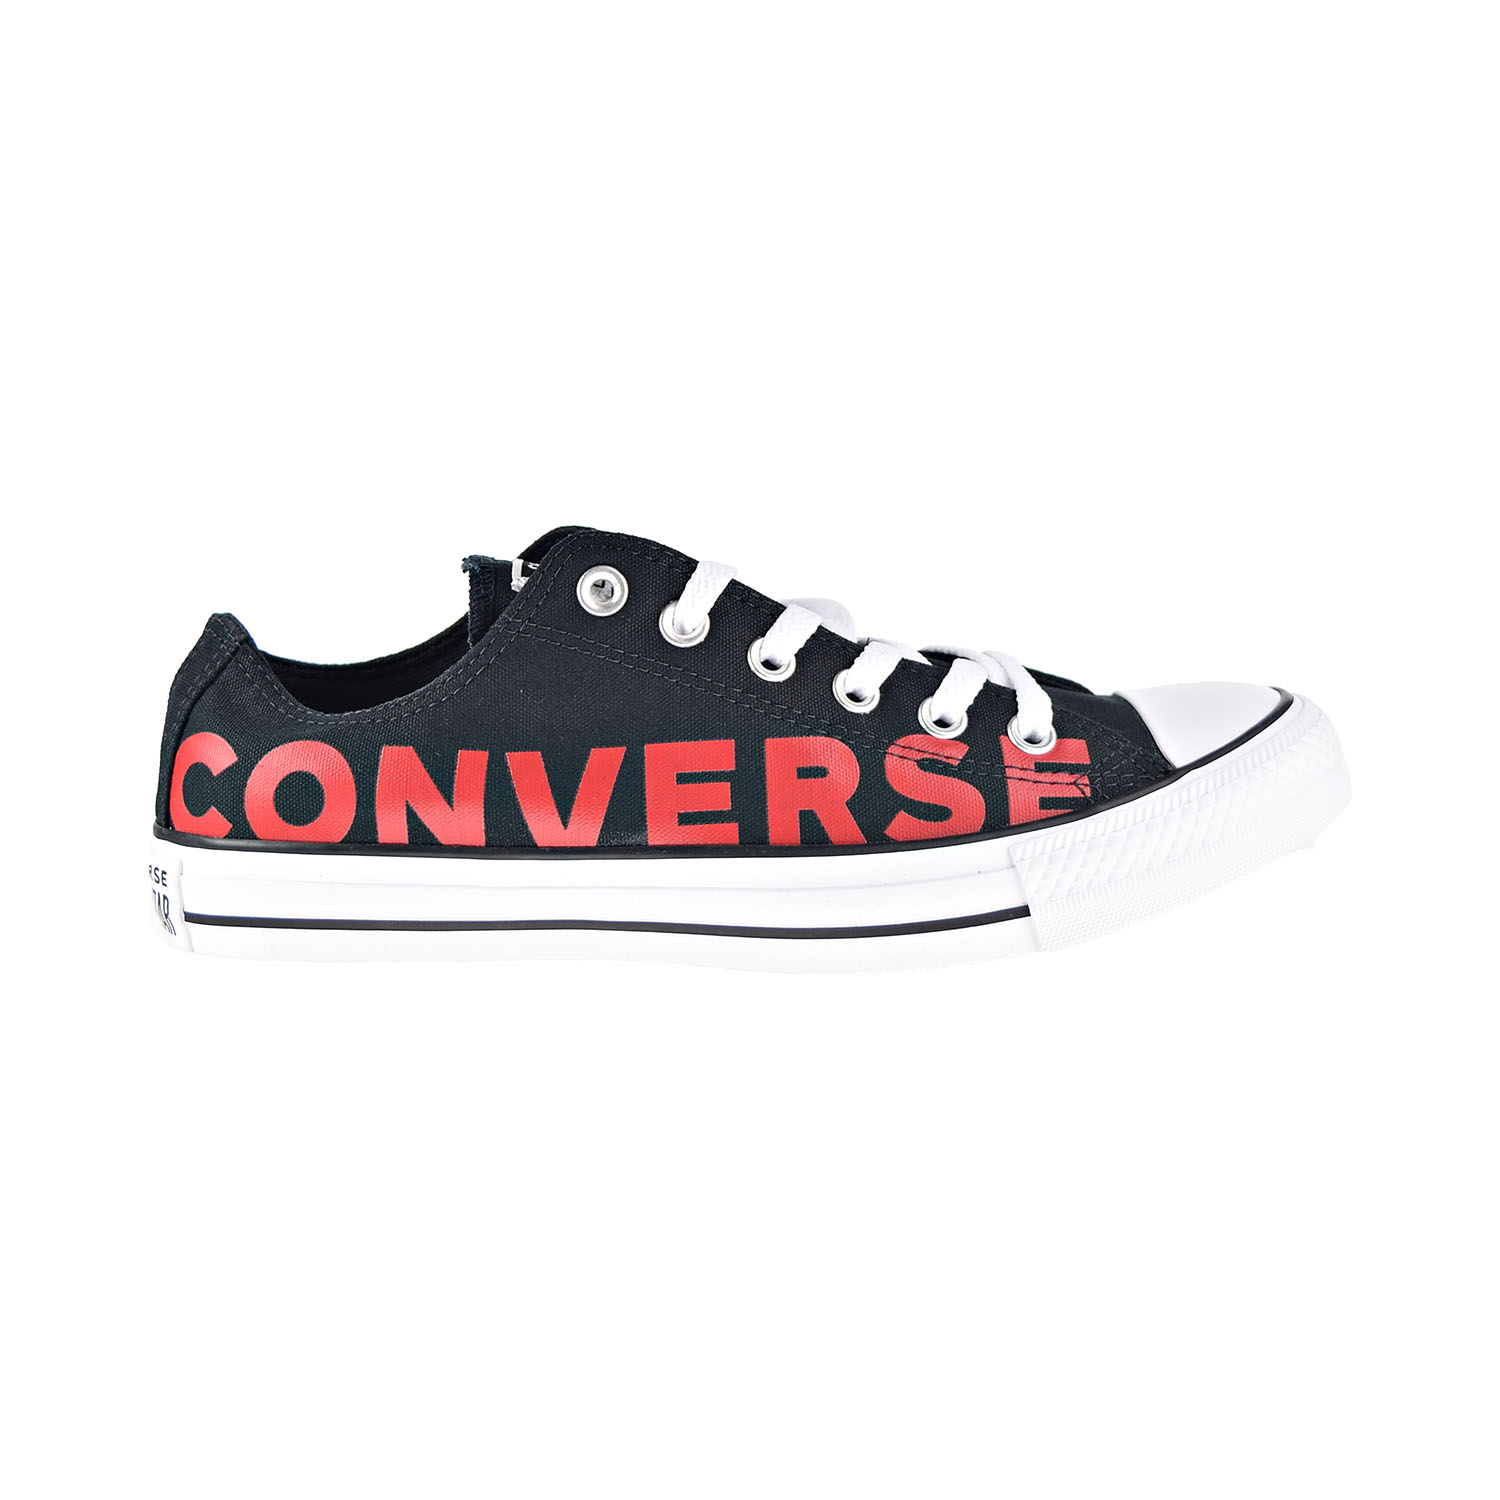 Converse Chuck Taylor All Star Ox Wordmark Men's Shoes Black-Enamel Red-White 165430f - image 1 of 6